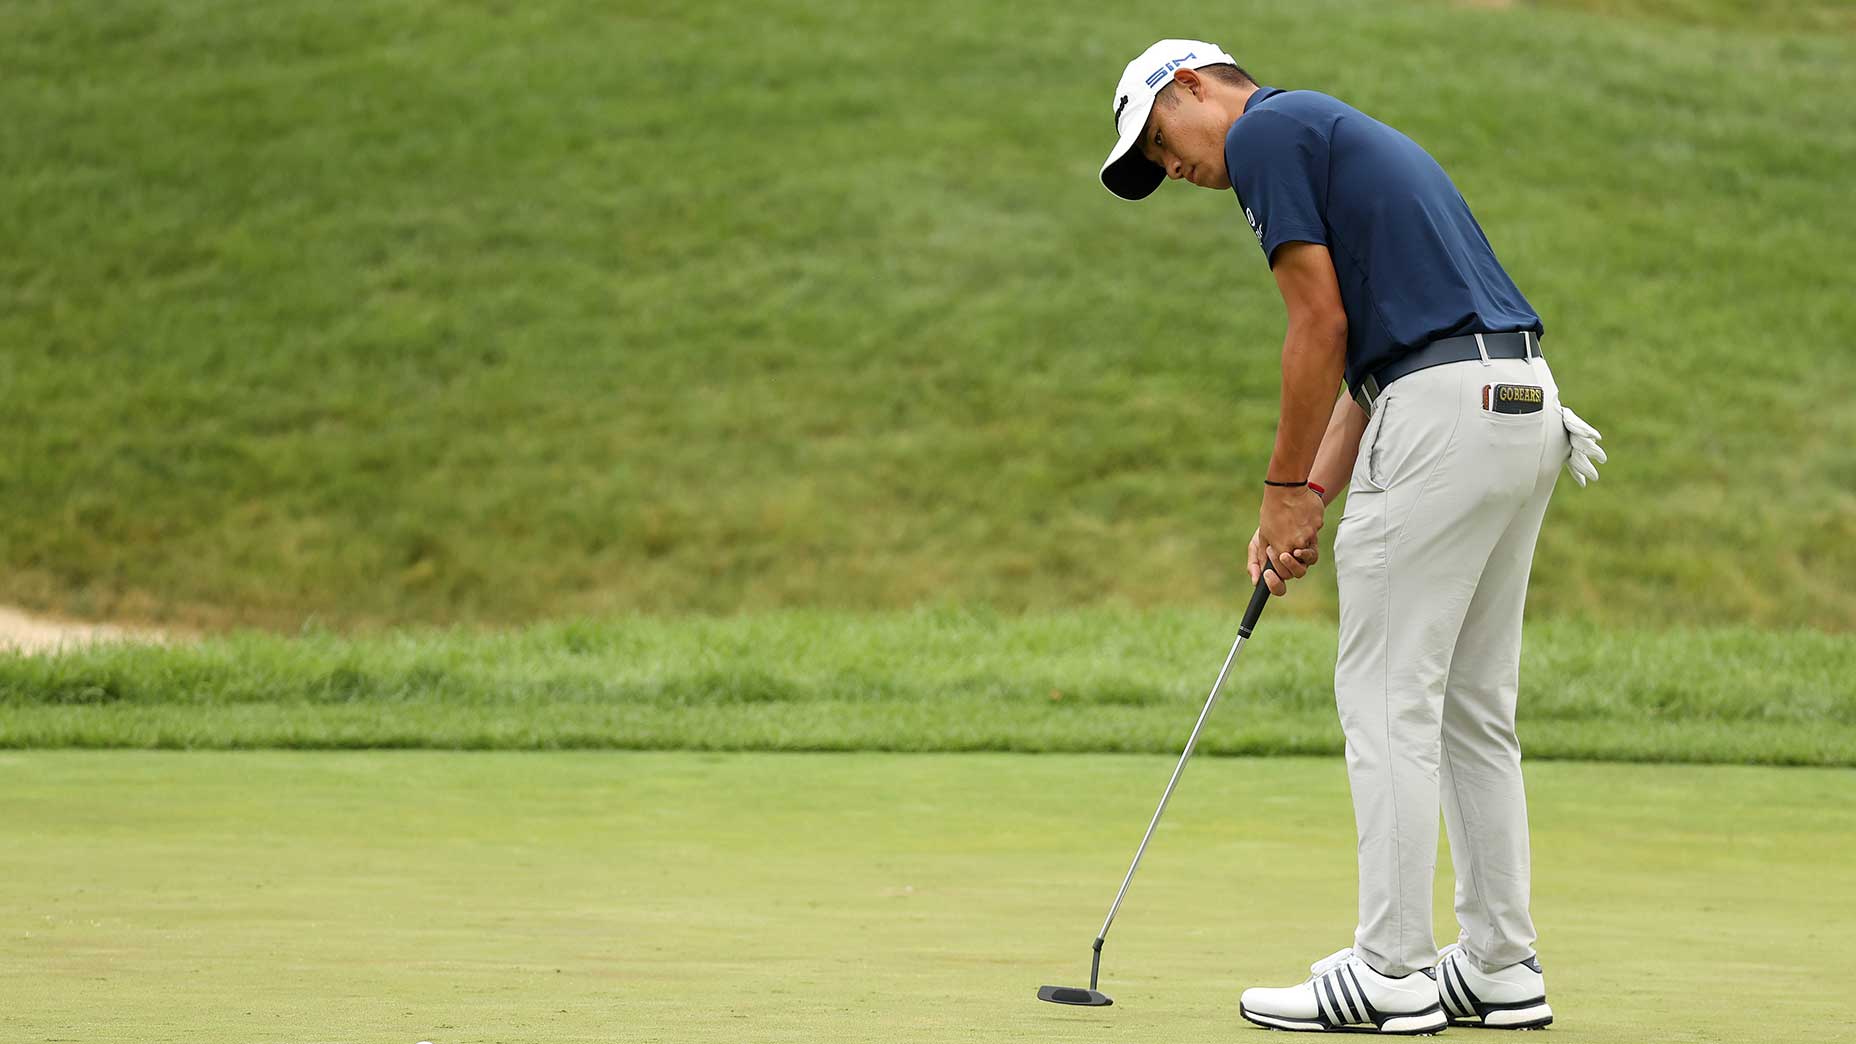 The Shoes Keeping Collin Morikawa Grounded After A Historic Muirfield Win